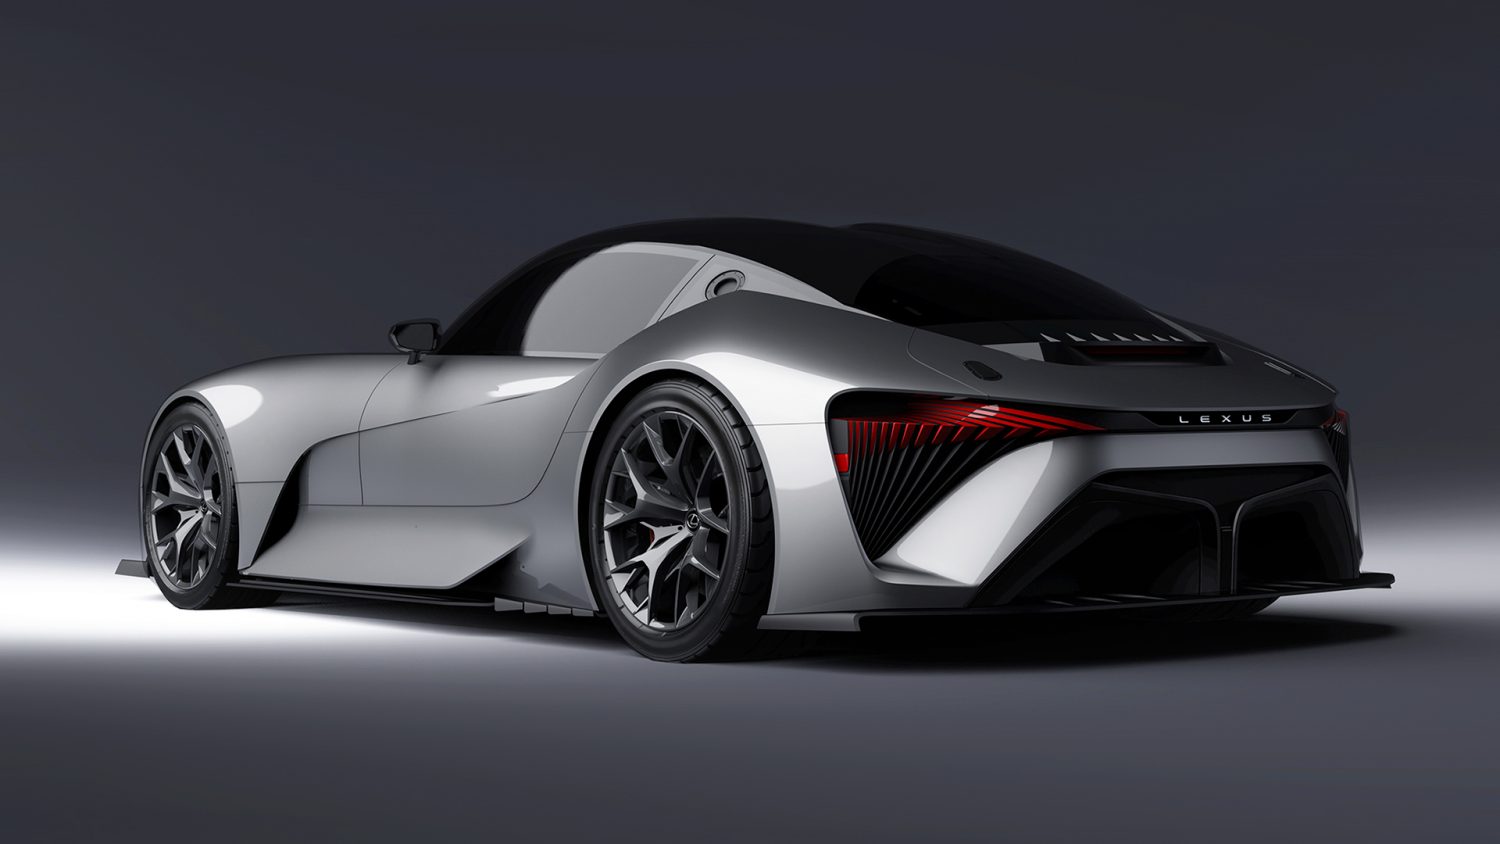 Rear view of 2025 Lexus electric supercar rendering showing shapely tail lights